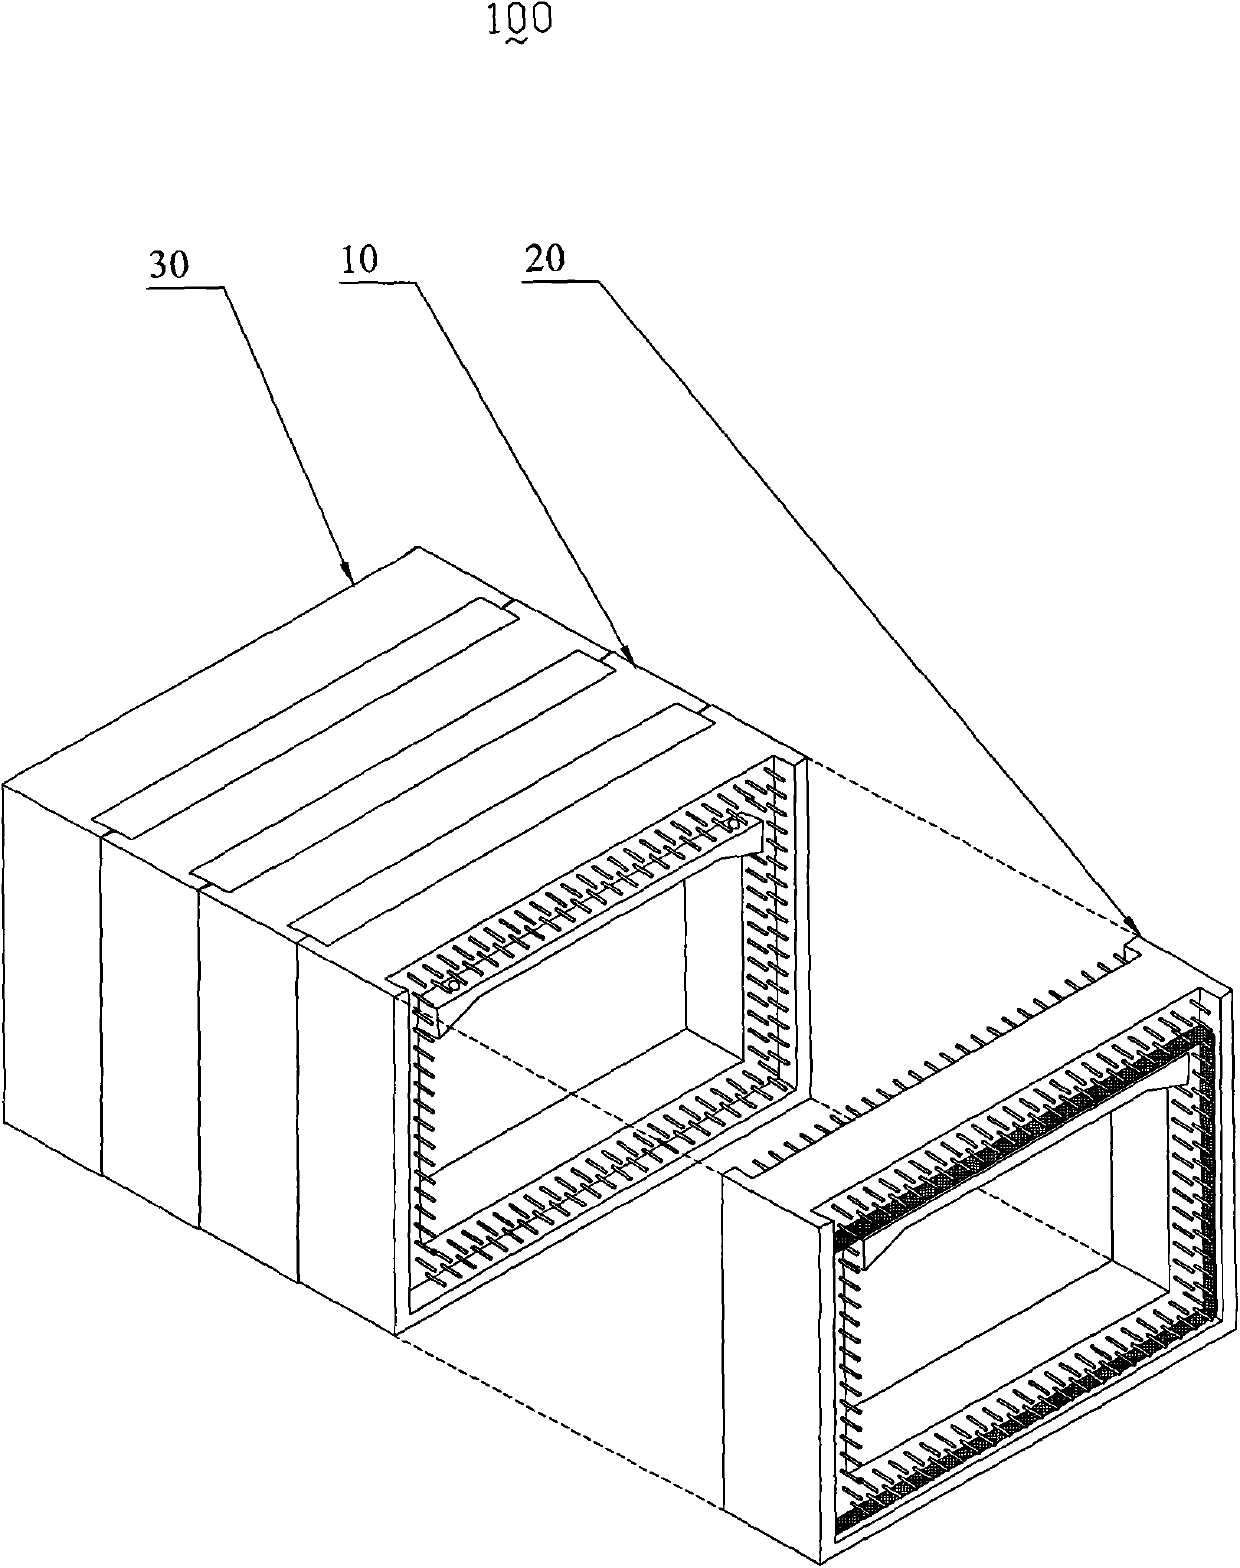 Prefabricated box culvert system and its installation method